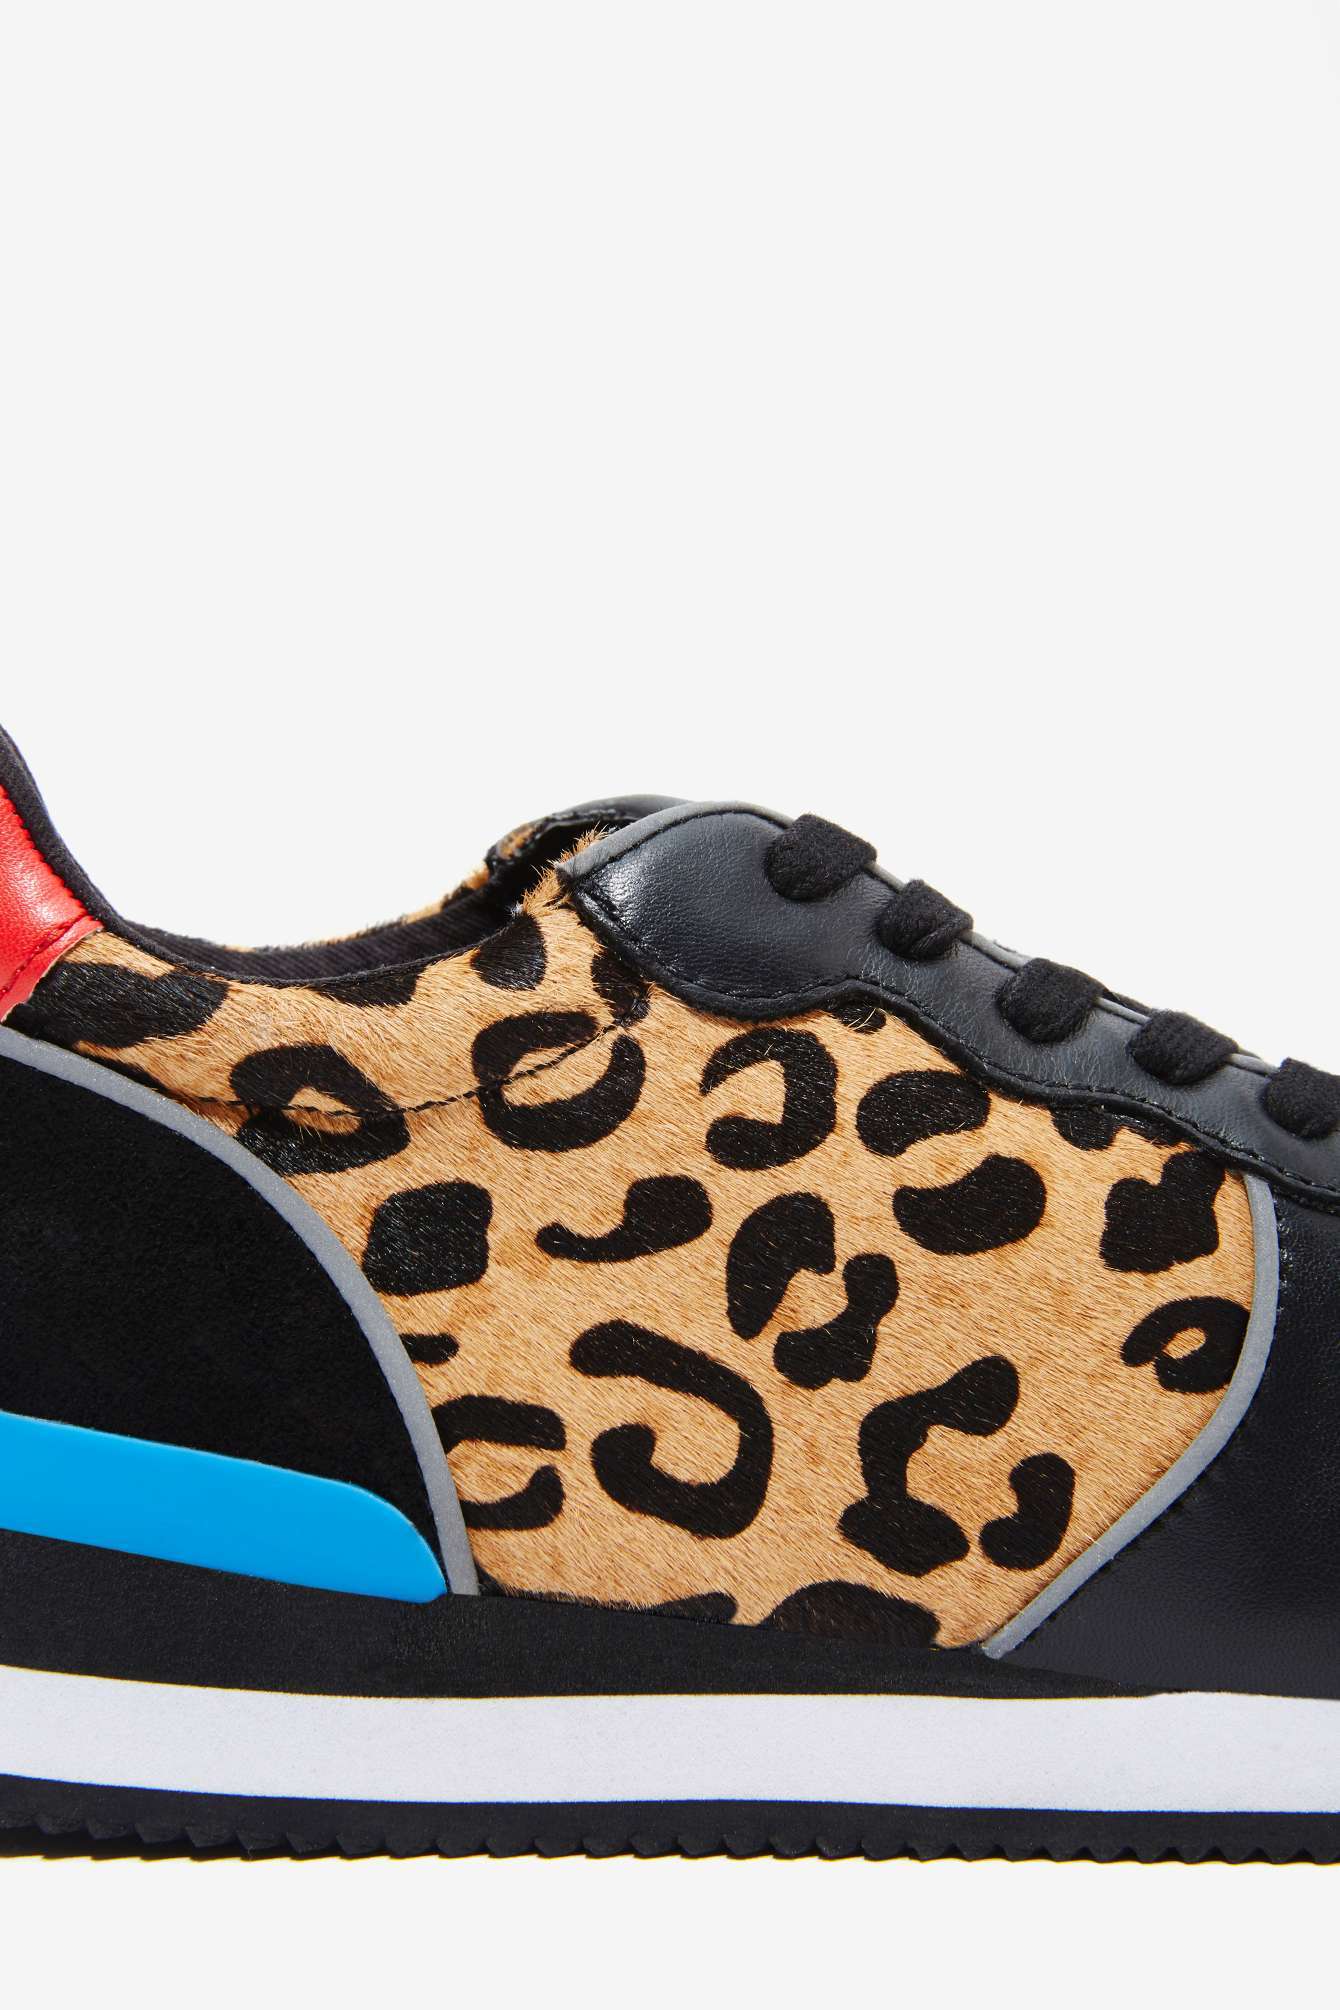 steve madden trainers leopard